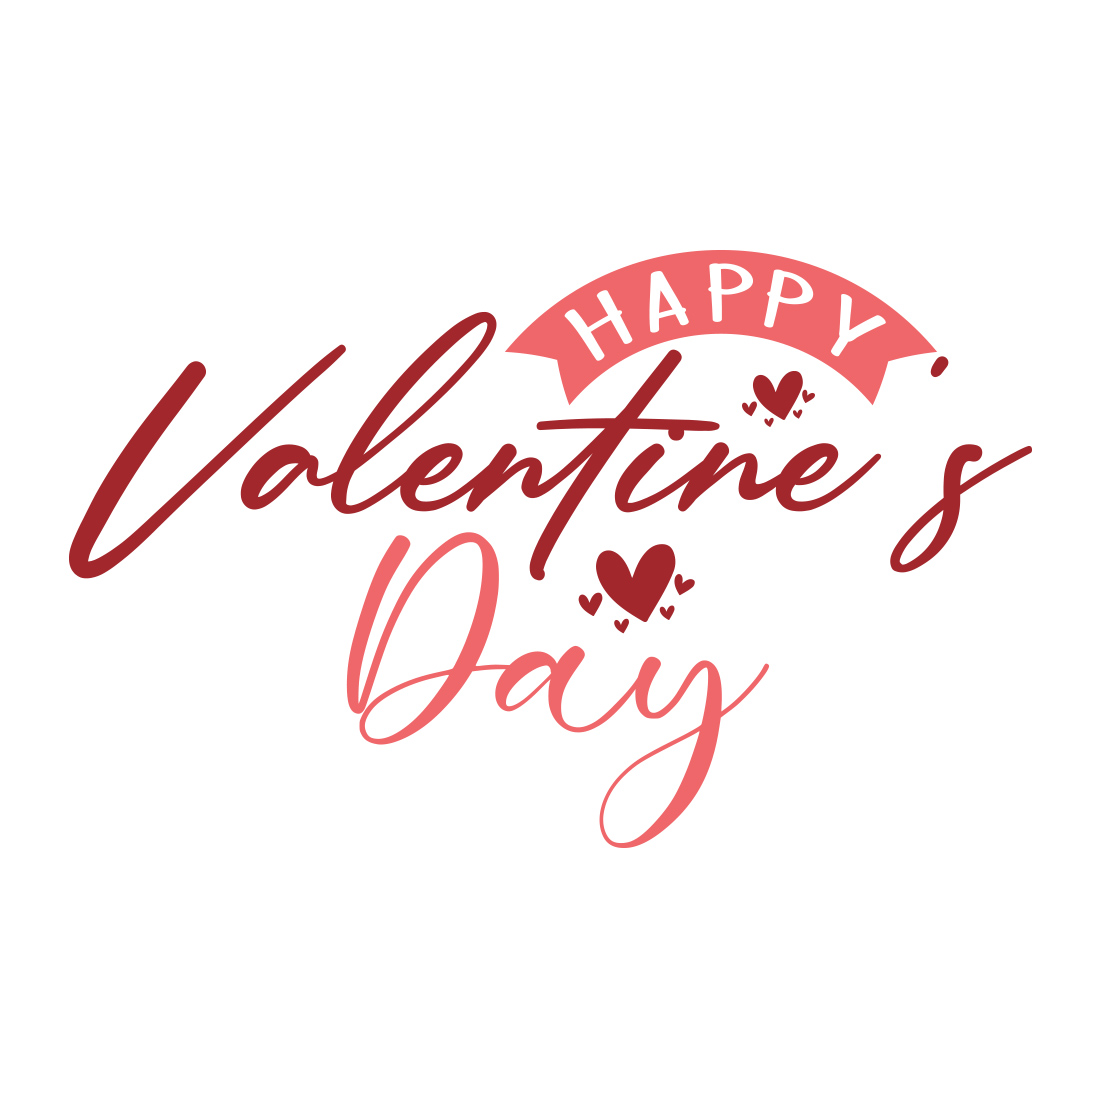 Image with amazing printable lettering Happy Valentines Day